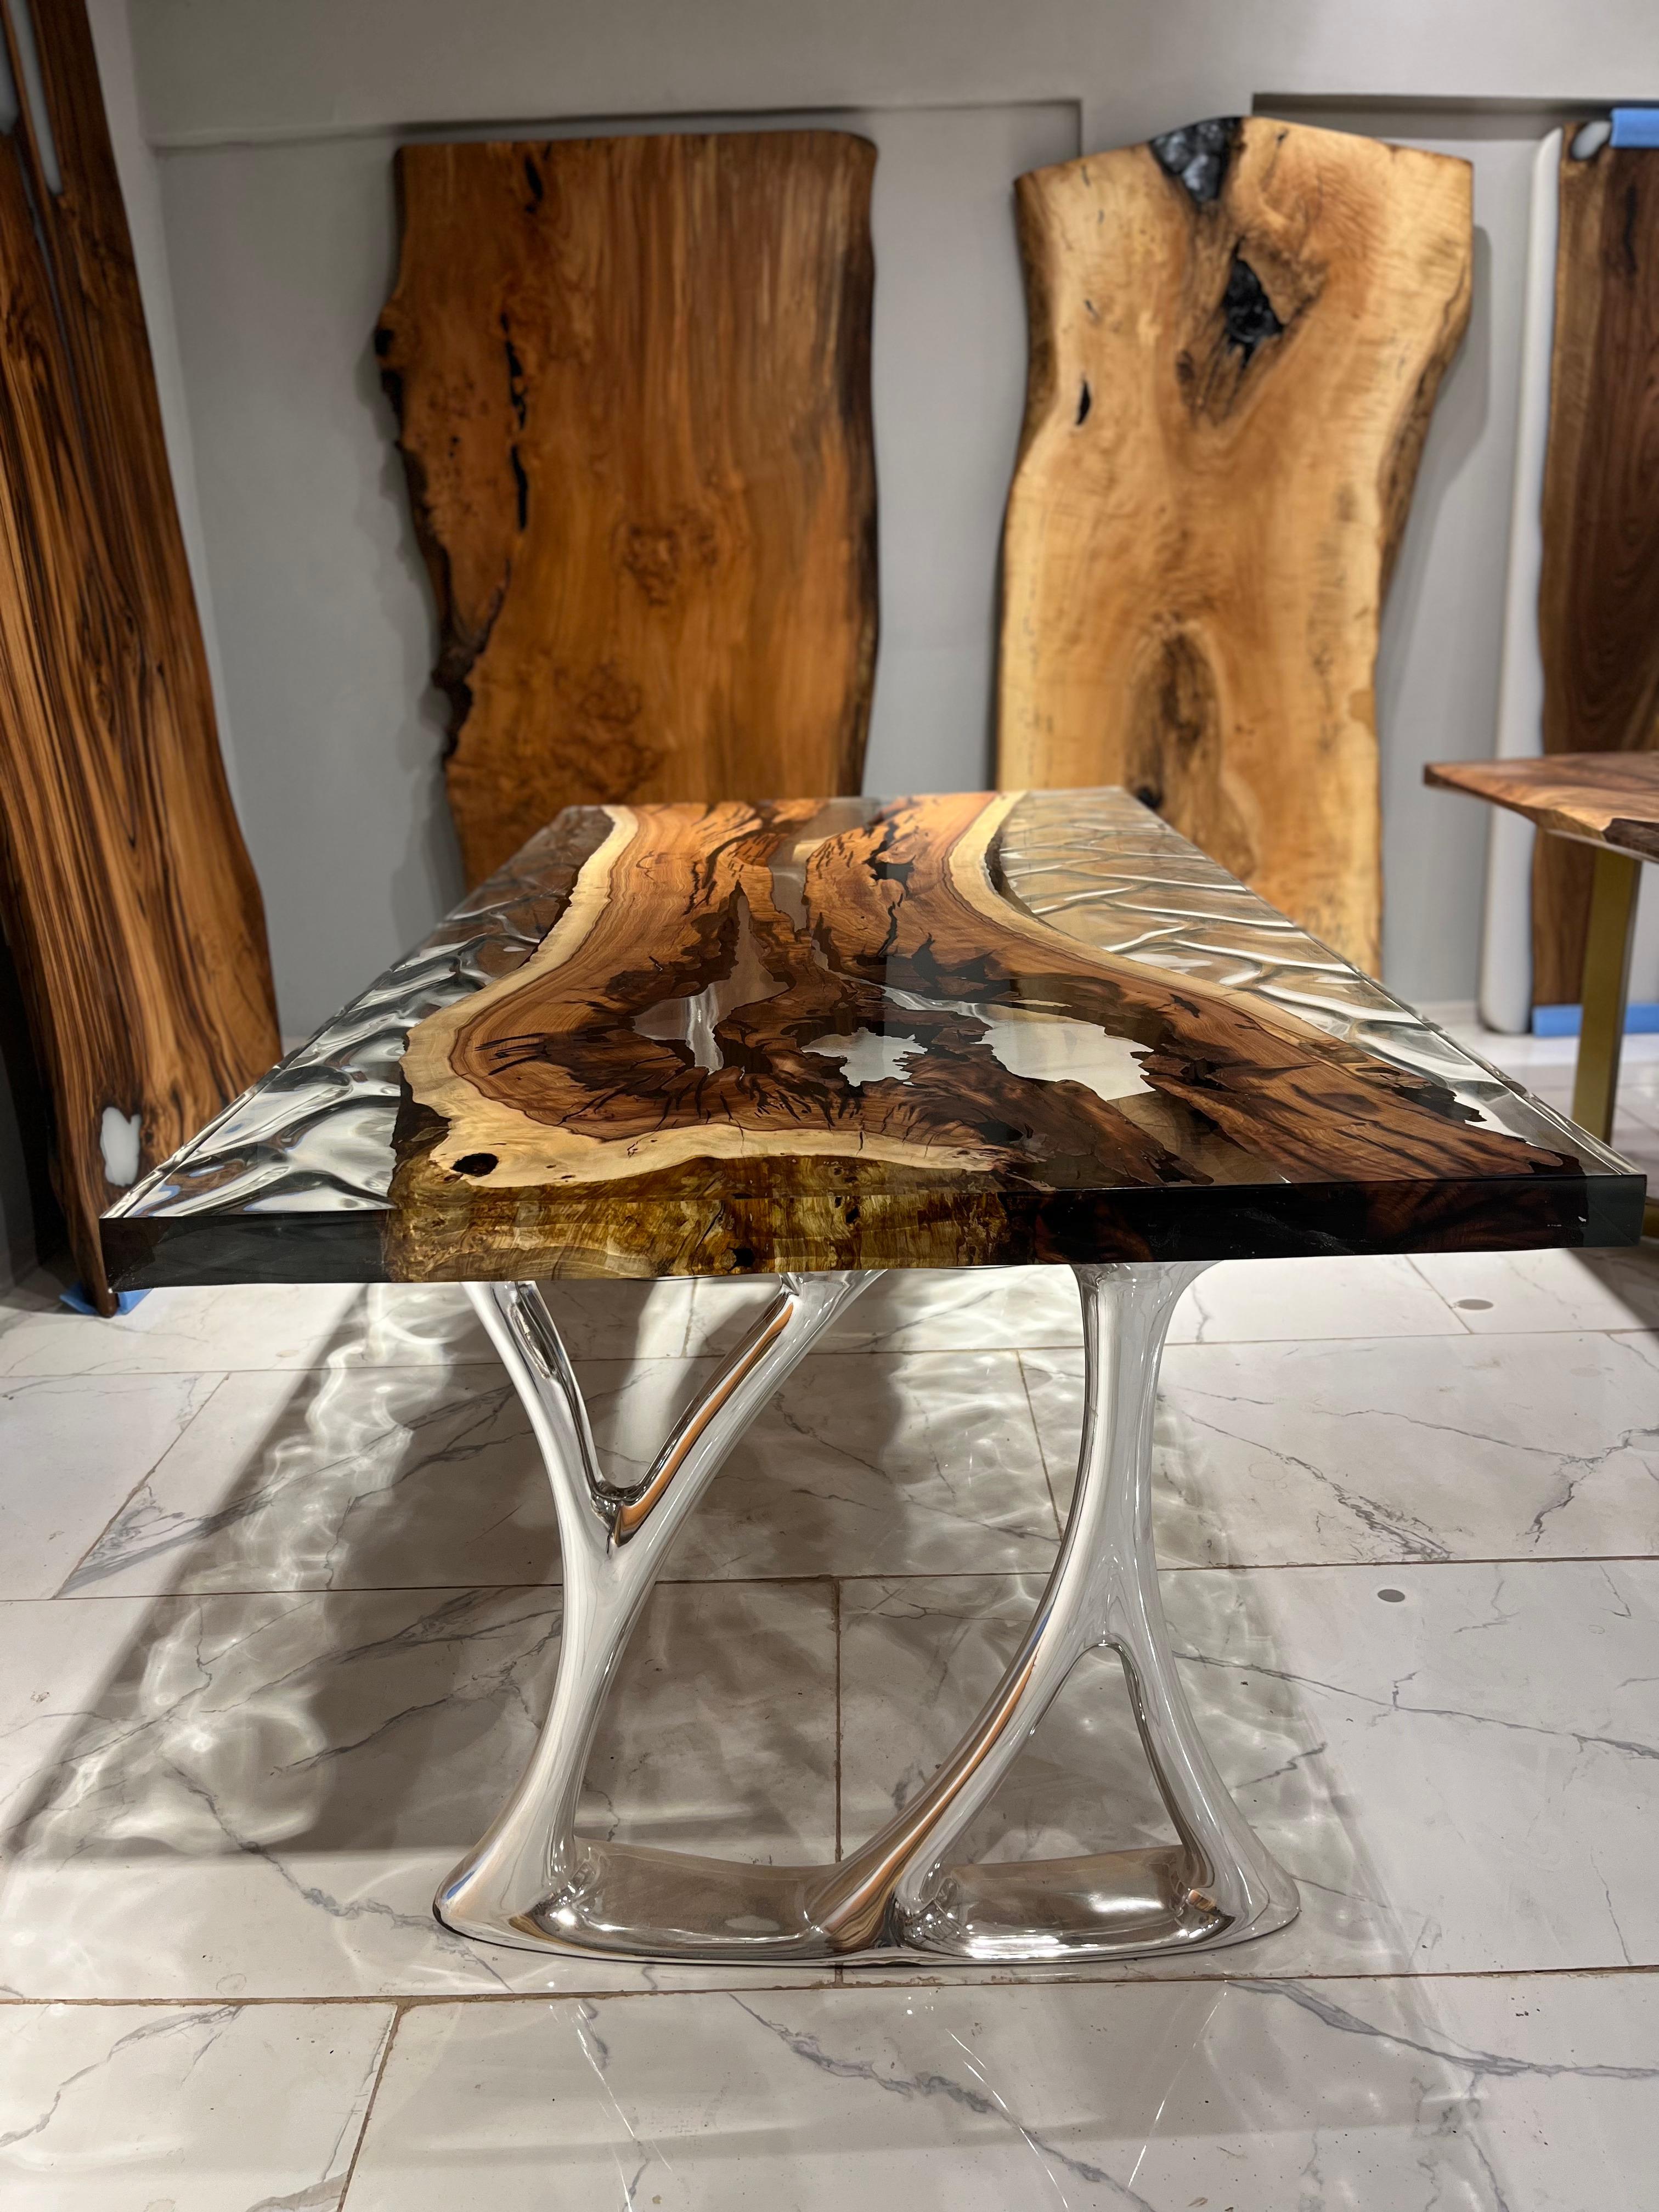 HACKBERRY CLEAR EPOXY RESIN DINING TABLE

This epoxy table emerges as a unique work of art, inspired by nature's beauty. 

The epoxy table stands out not only for its design but also its durability. Thanks to its epoxy coating, it is highly